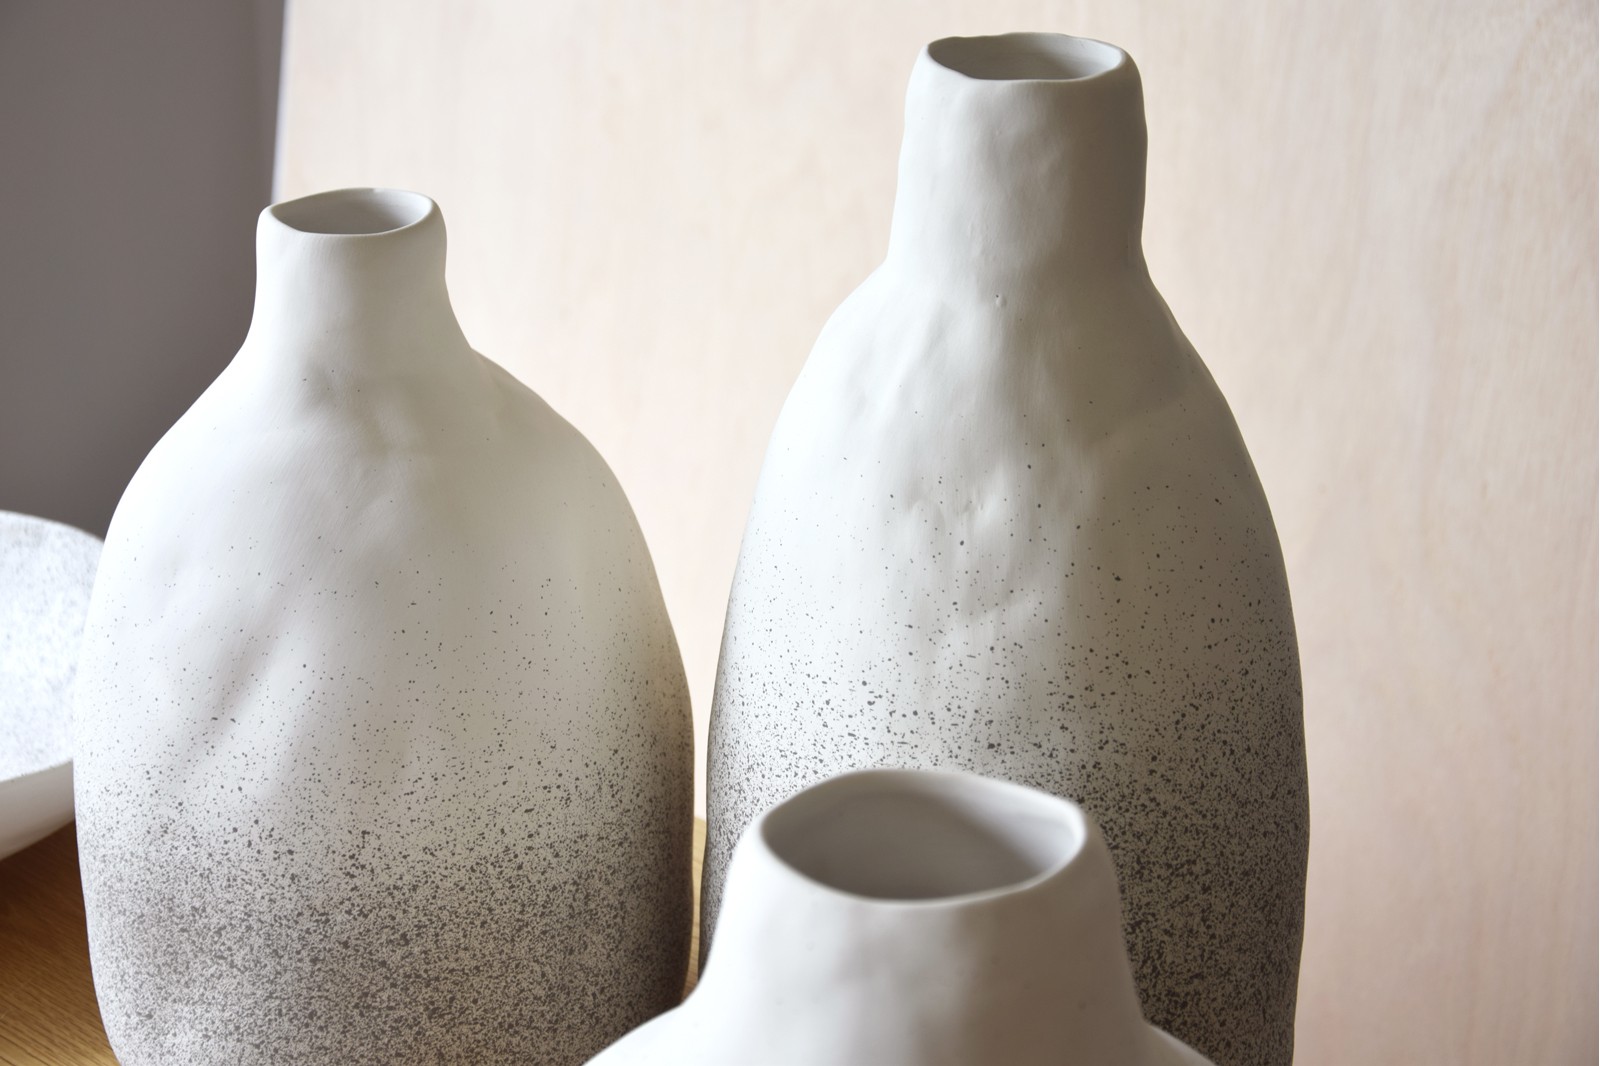 TOSCA COLLECTION: CERAMIC VASES AND CENTERPIECE